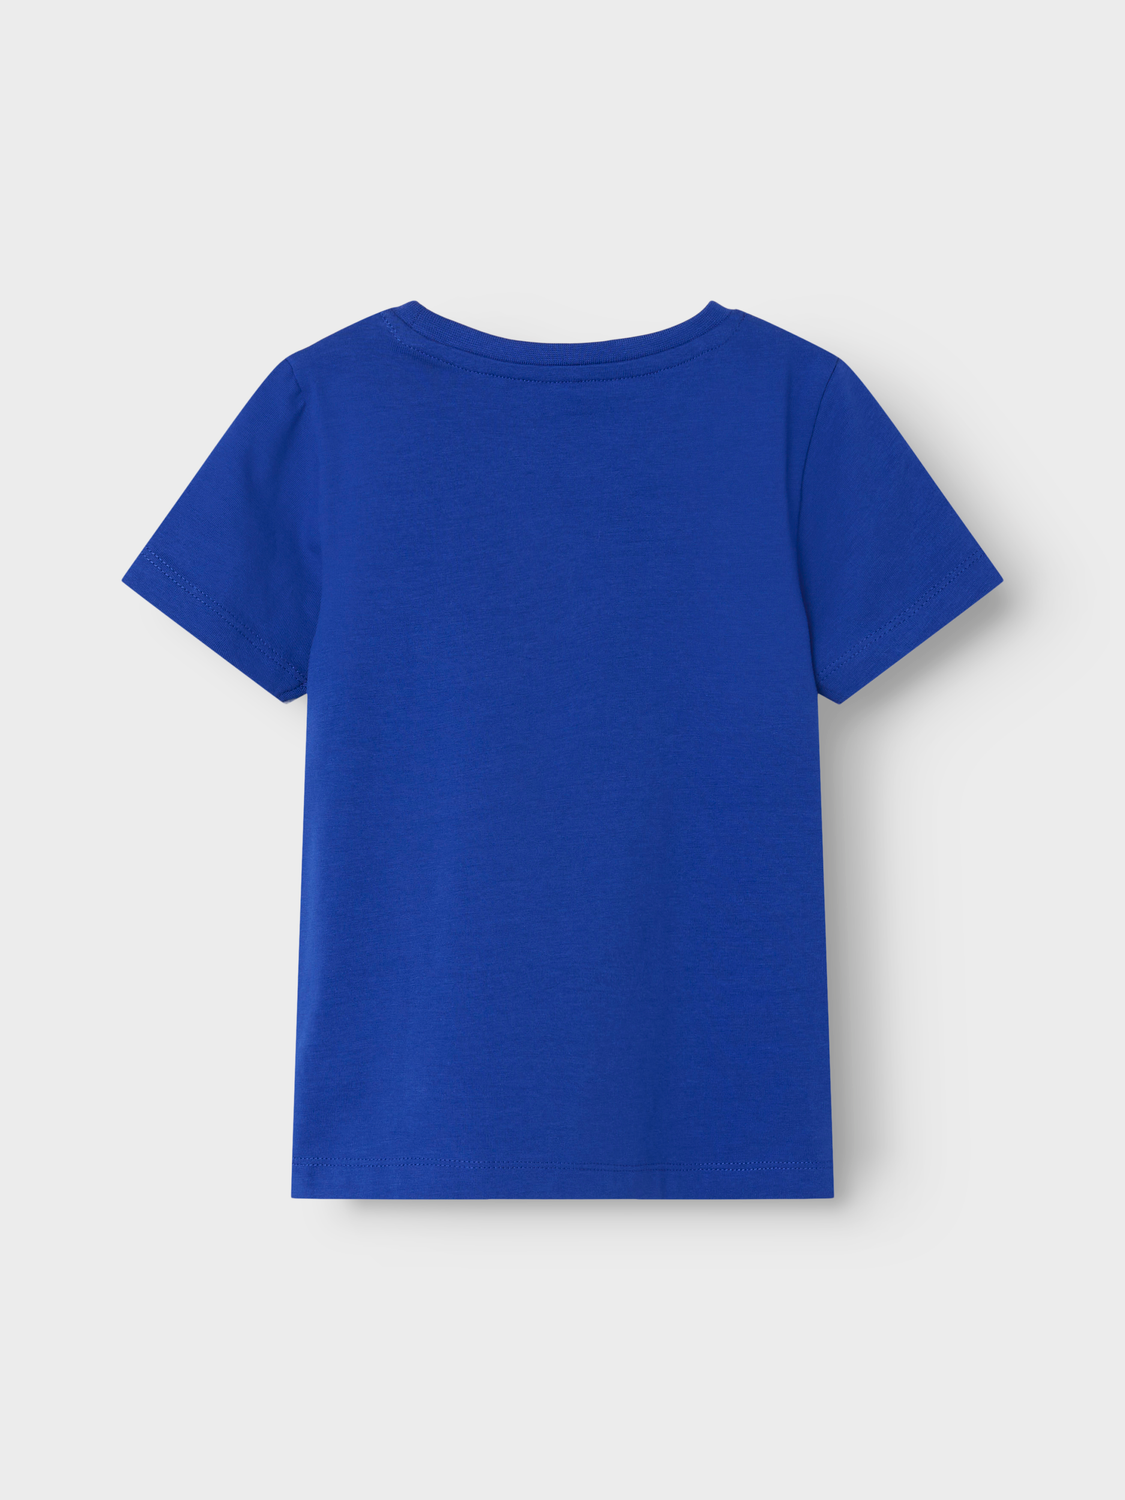 NMMFELO T-Shirts & Tops - Clematis Blue